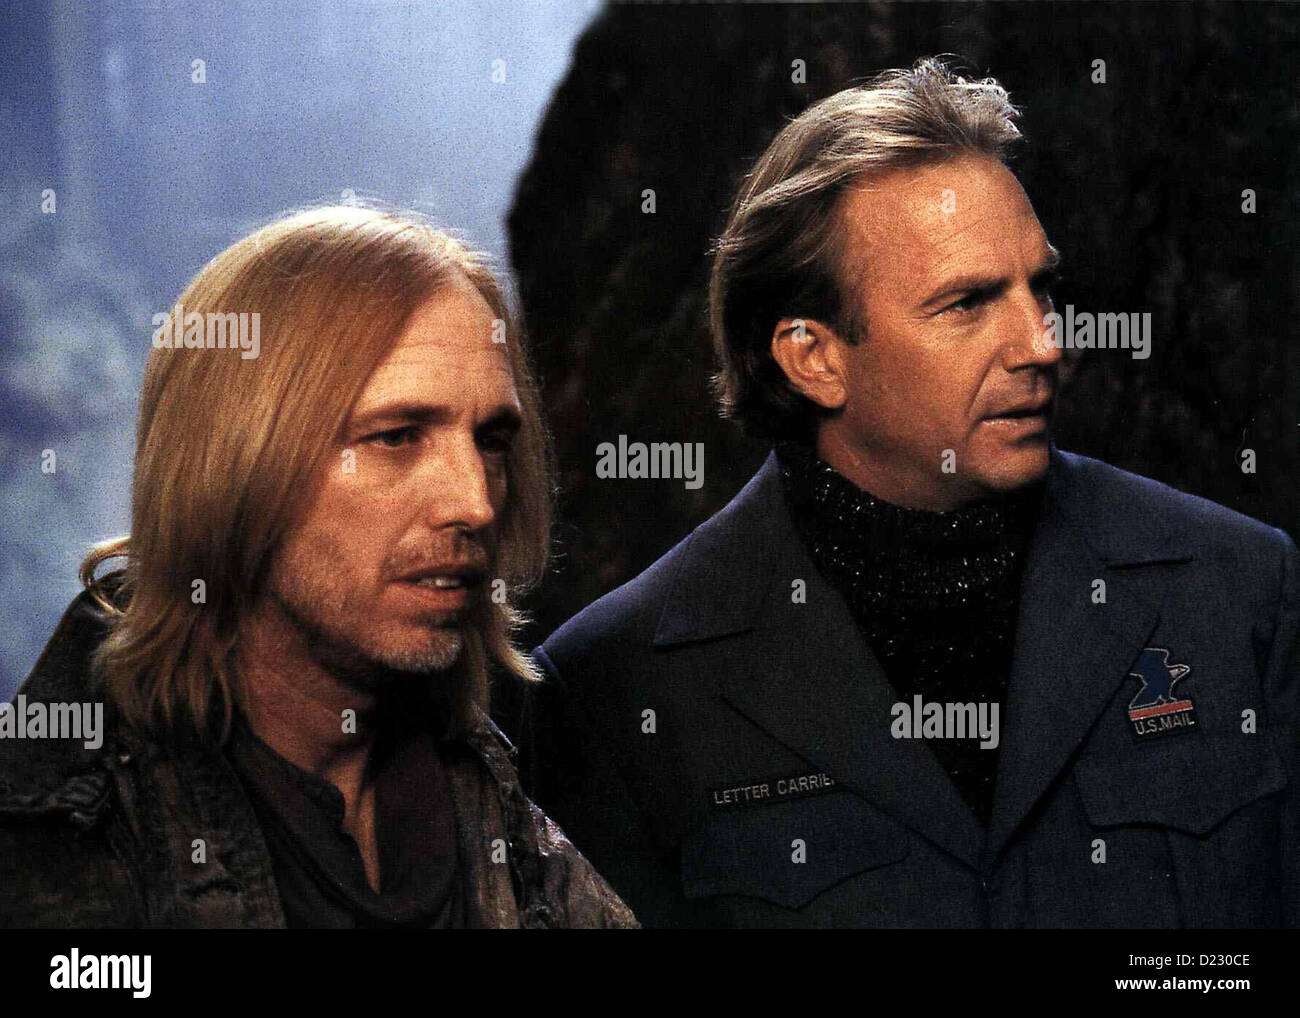 Postman   Postman, The   Tom Petty, Kevin Costner *** Local Caption *** 1997  -- Stock Photo